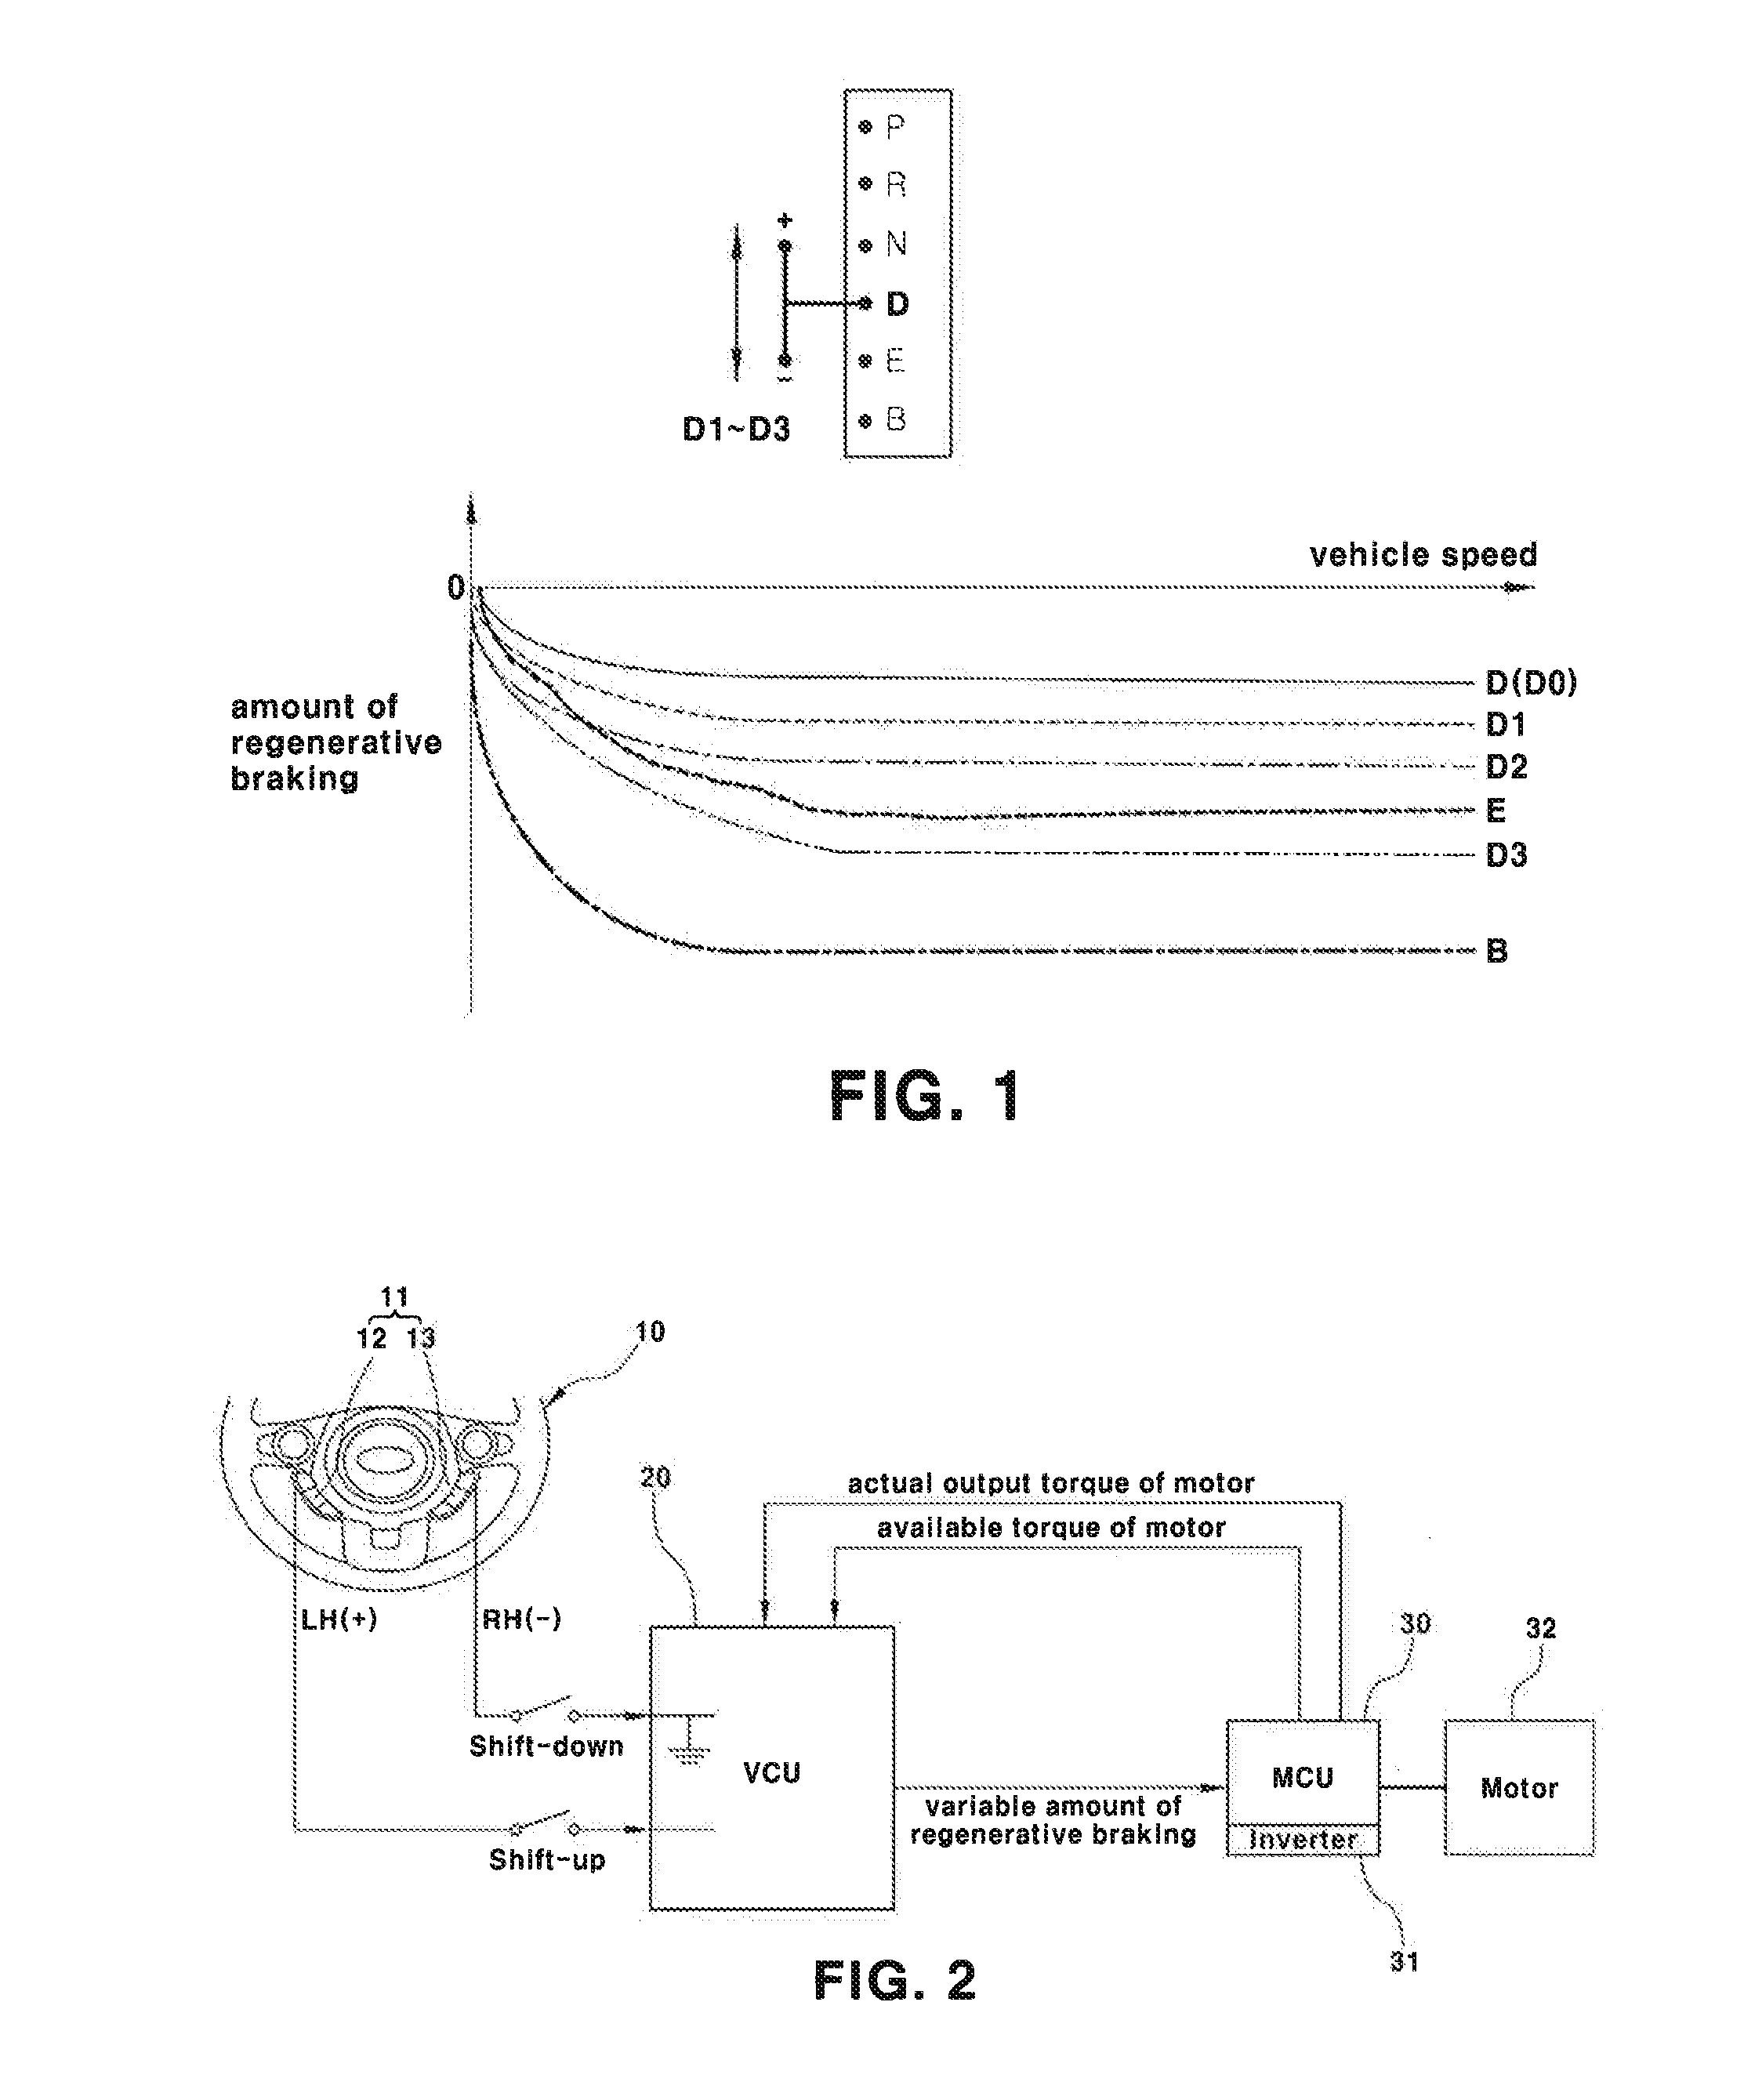 Control apparatus and method for regenerative braking of eco-friendly vehicle